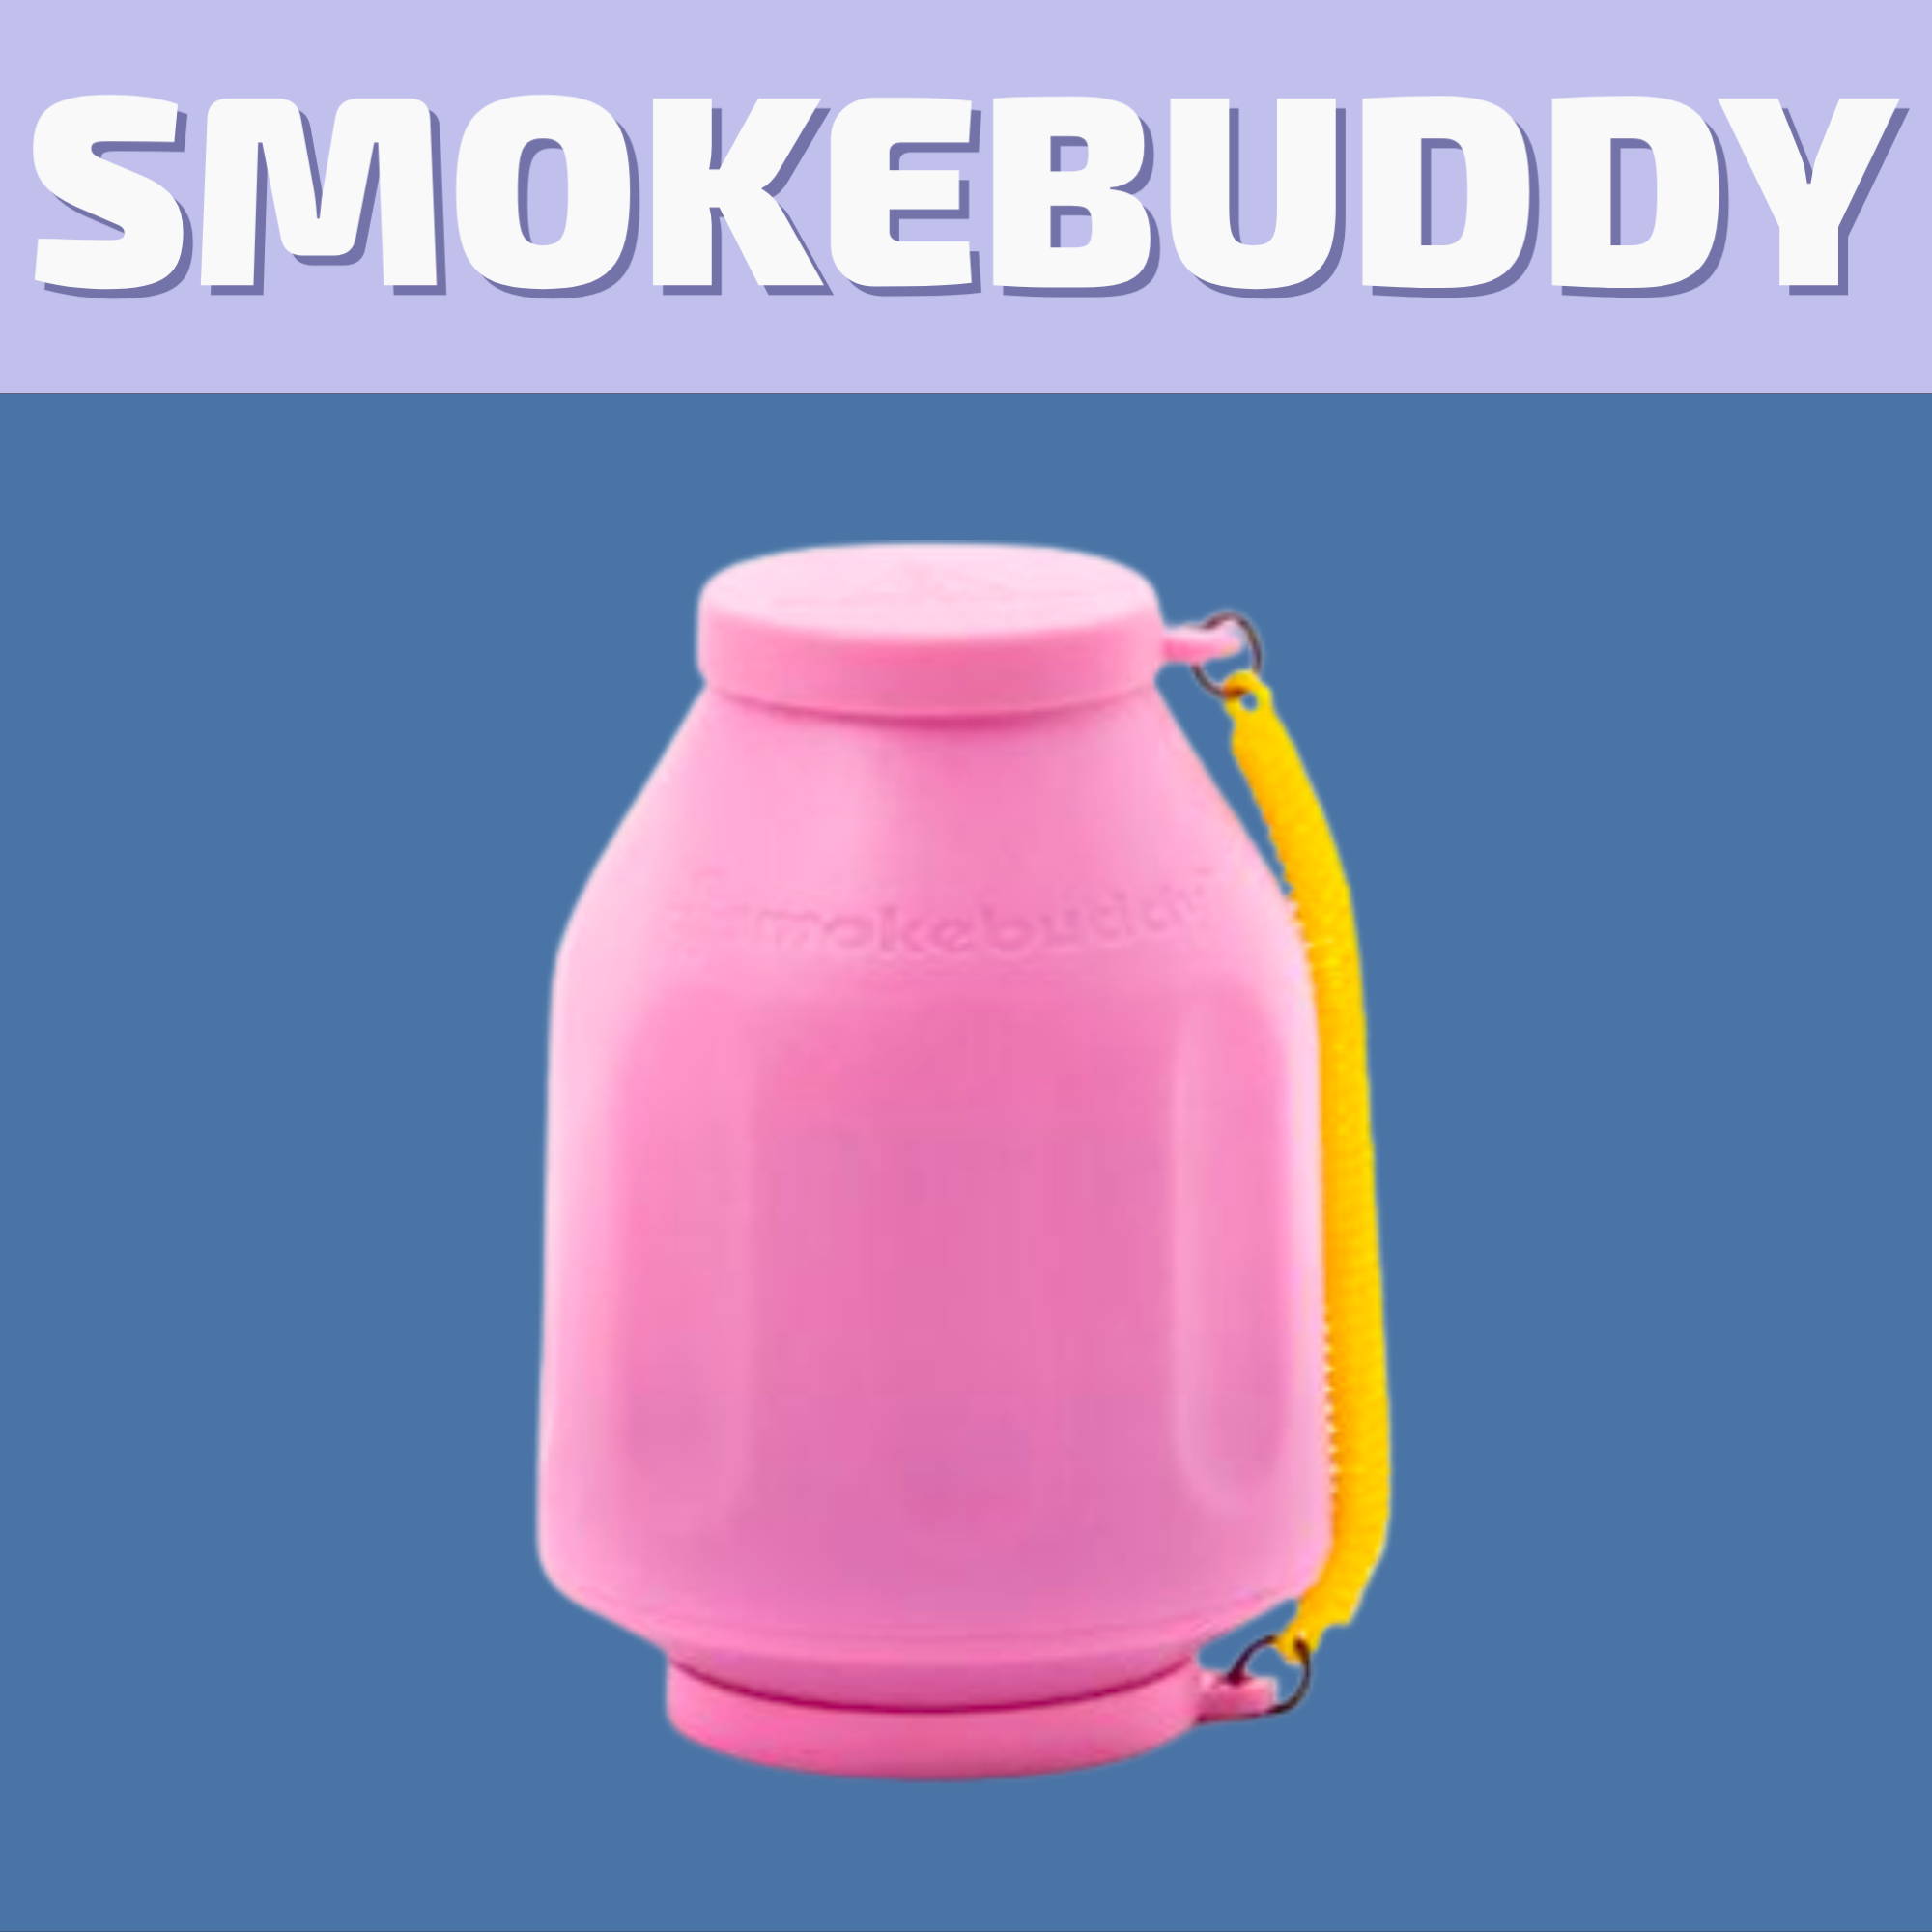 Buy a Smoke Buddy for same day delivery in Winnipeg or pick up at Winnipeg's best dispensary.